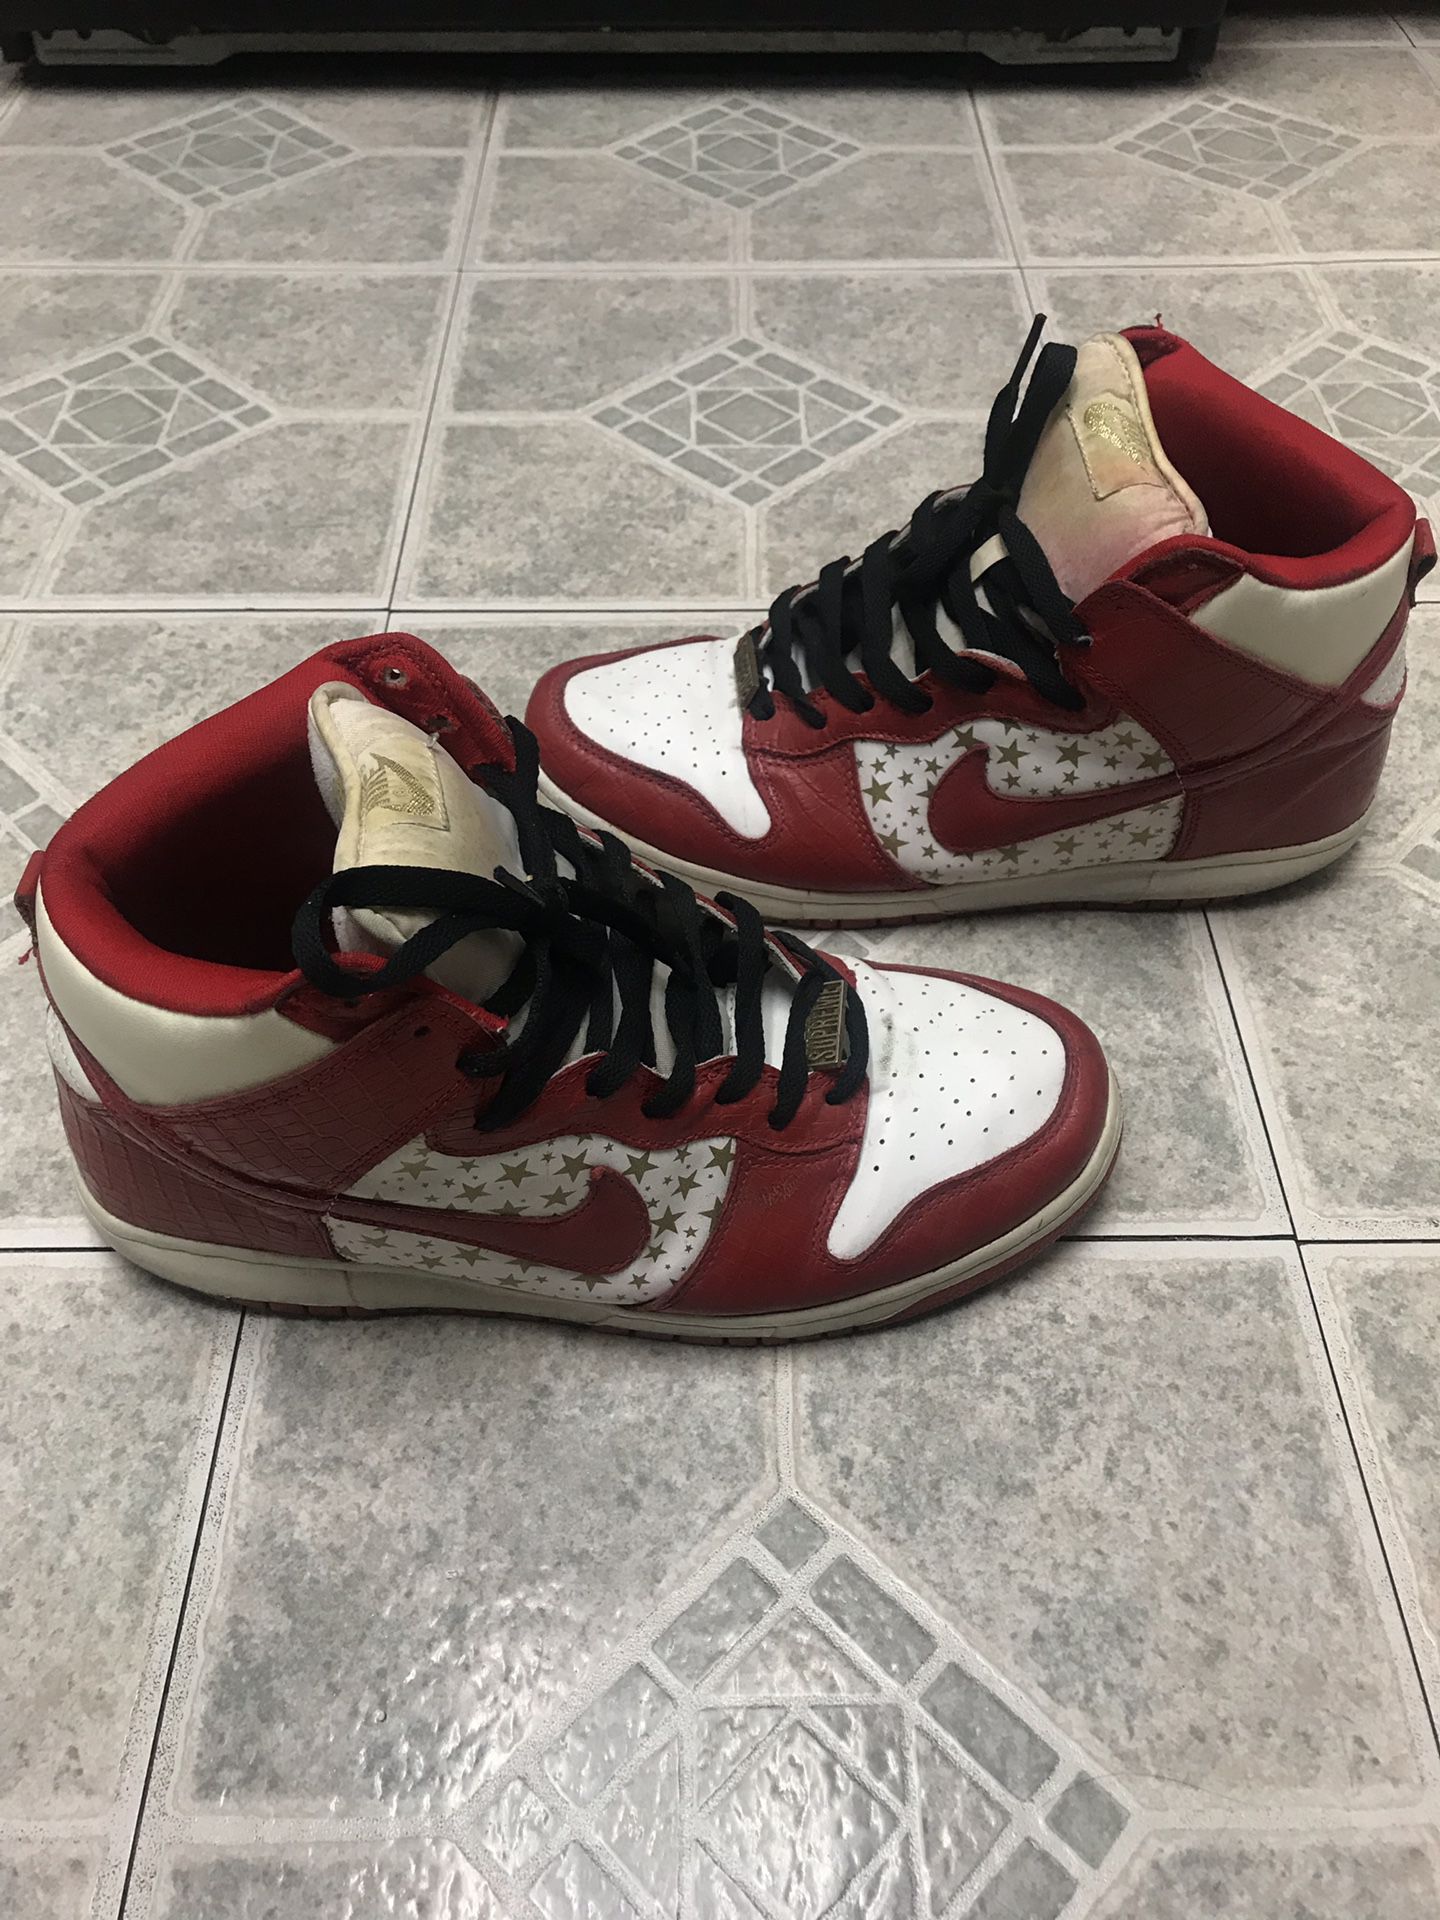 Supreme Dunks SB high red stars size 11 used off white